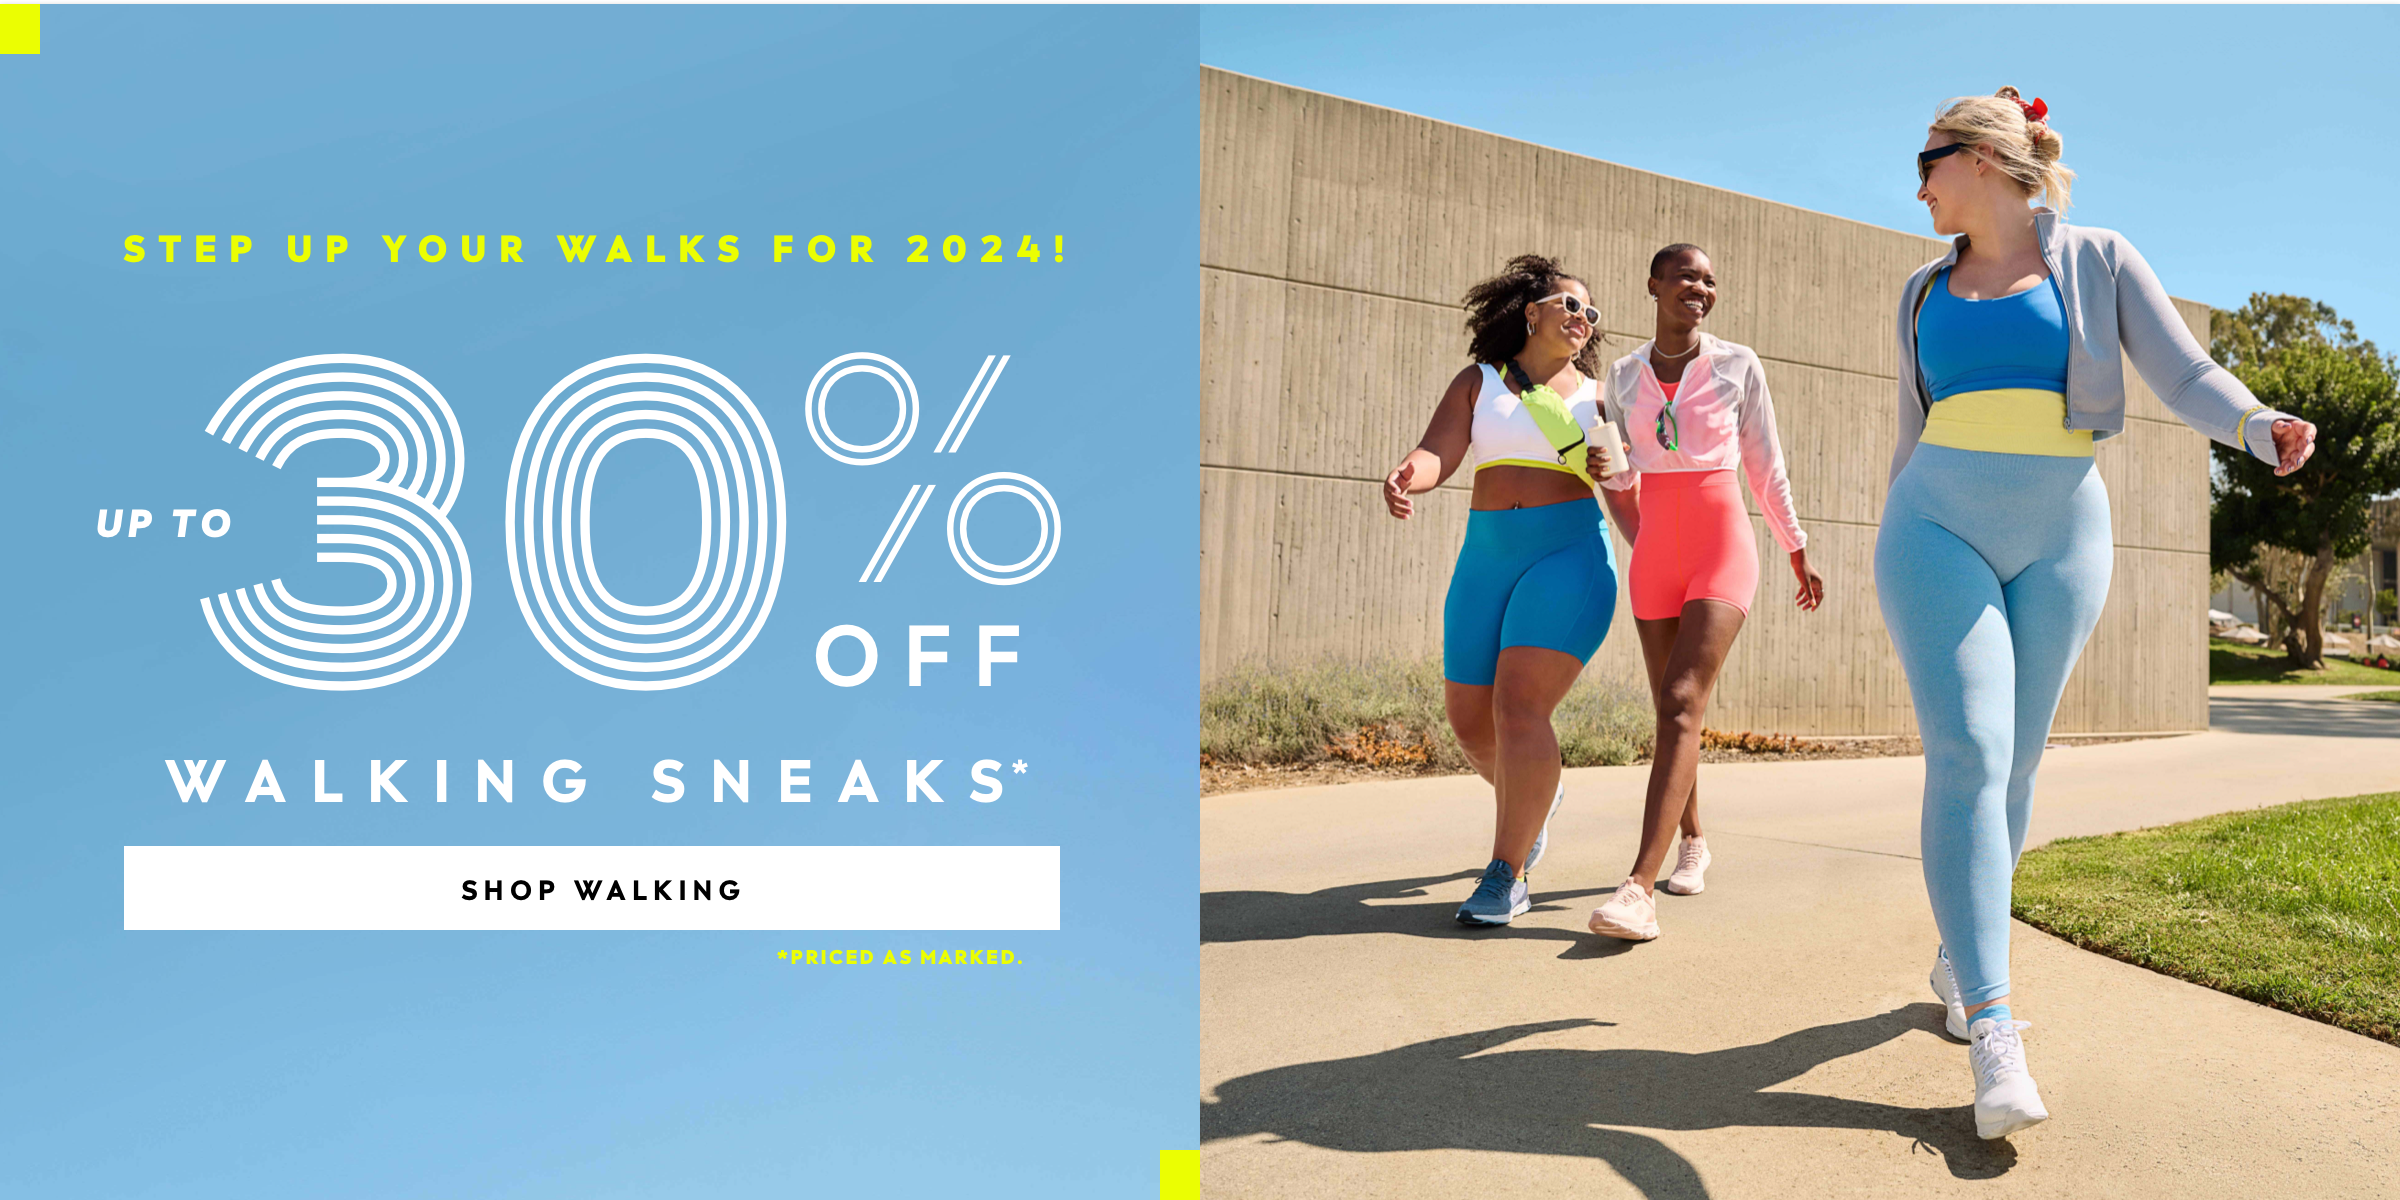 Step up your walks for 2024! Up to 30% off walking sneakers, priced as marked.